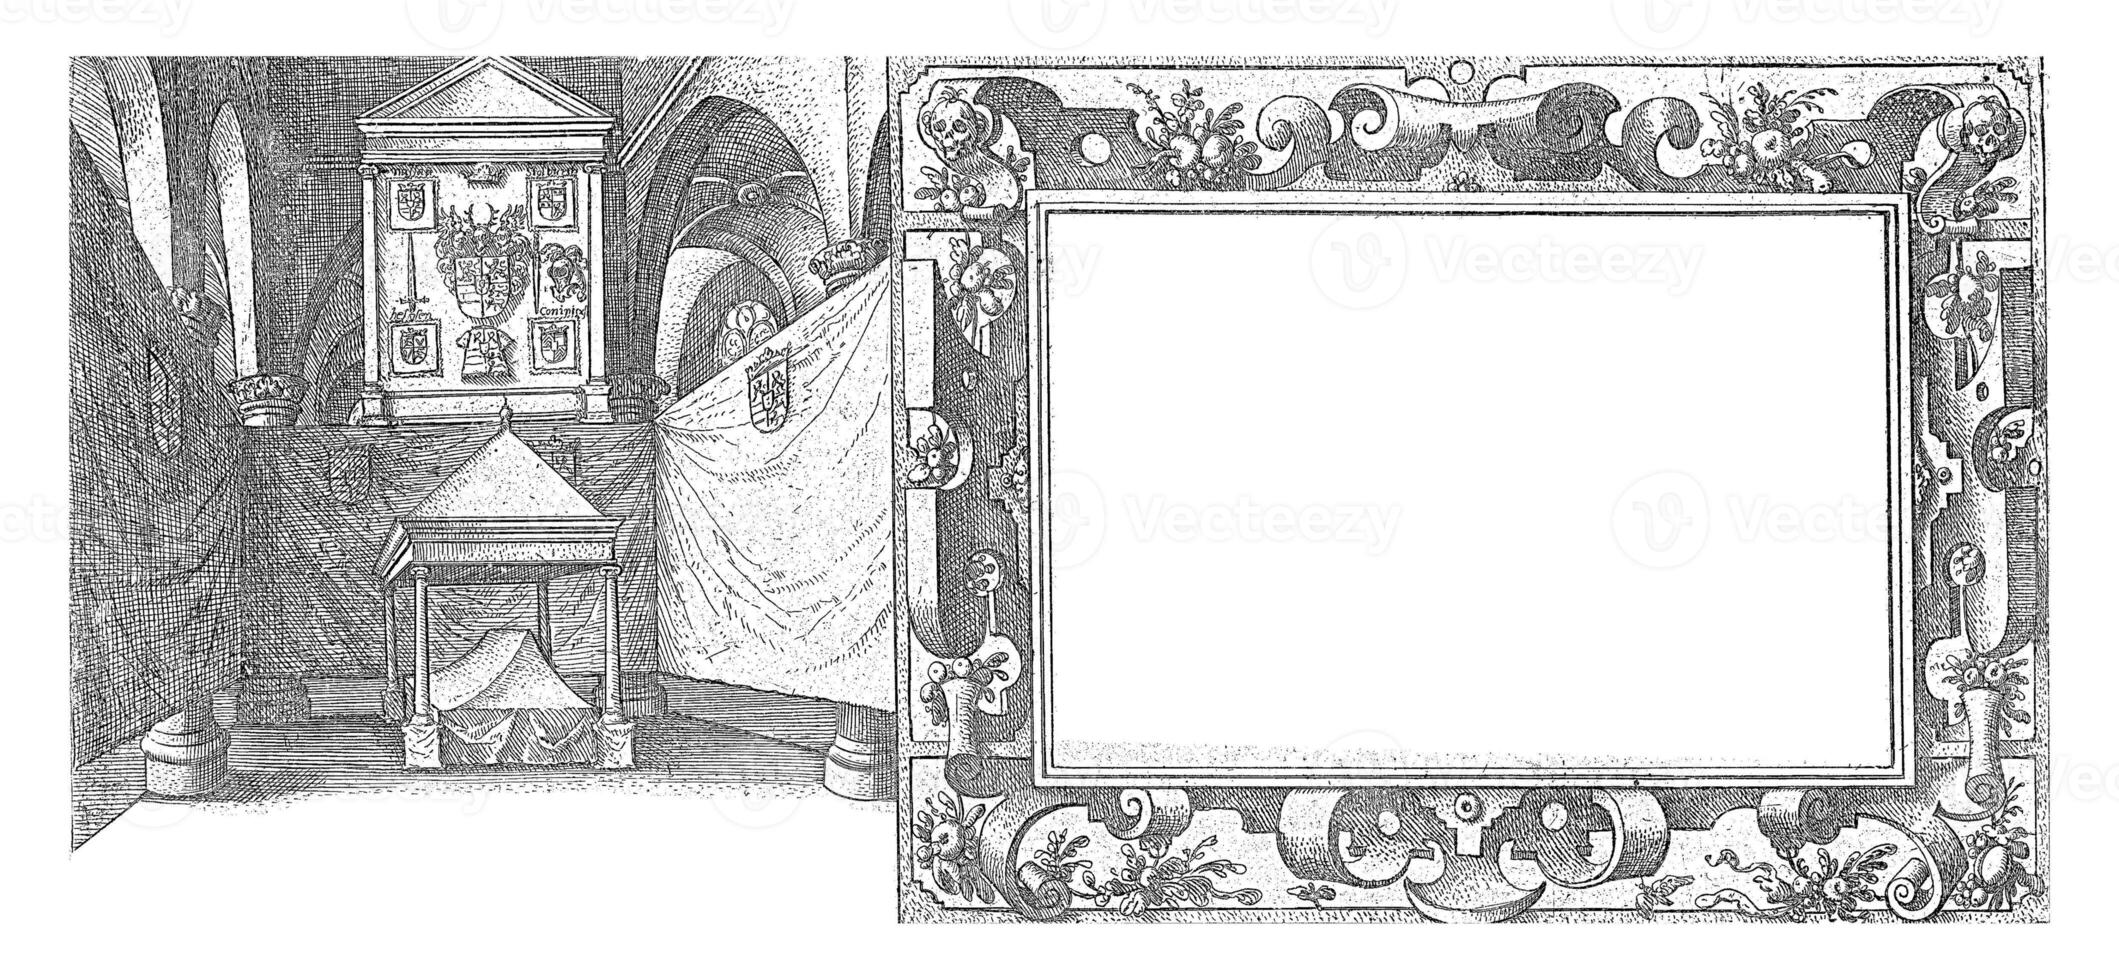 Title print for the series of the funeral procession of William of Orange photo